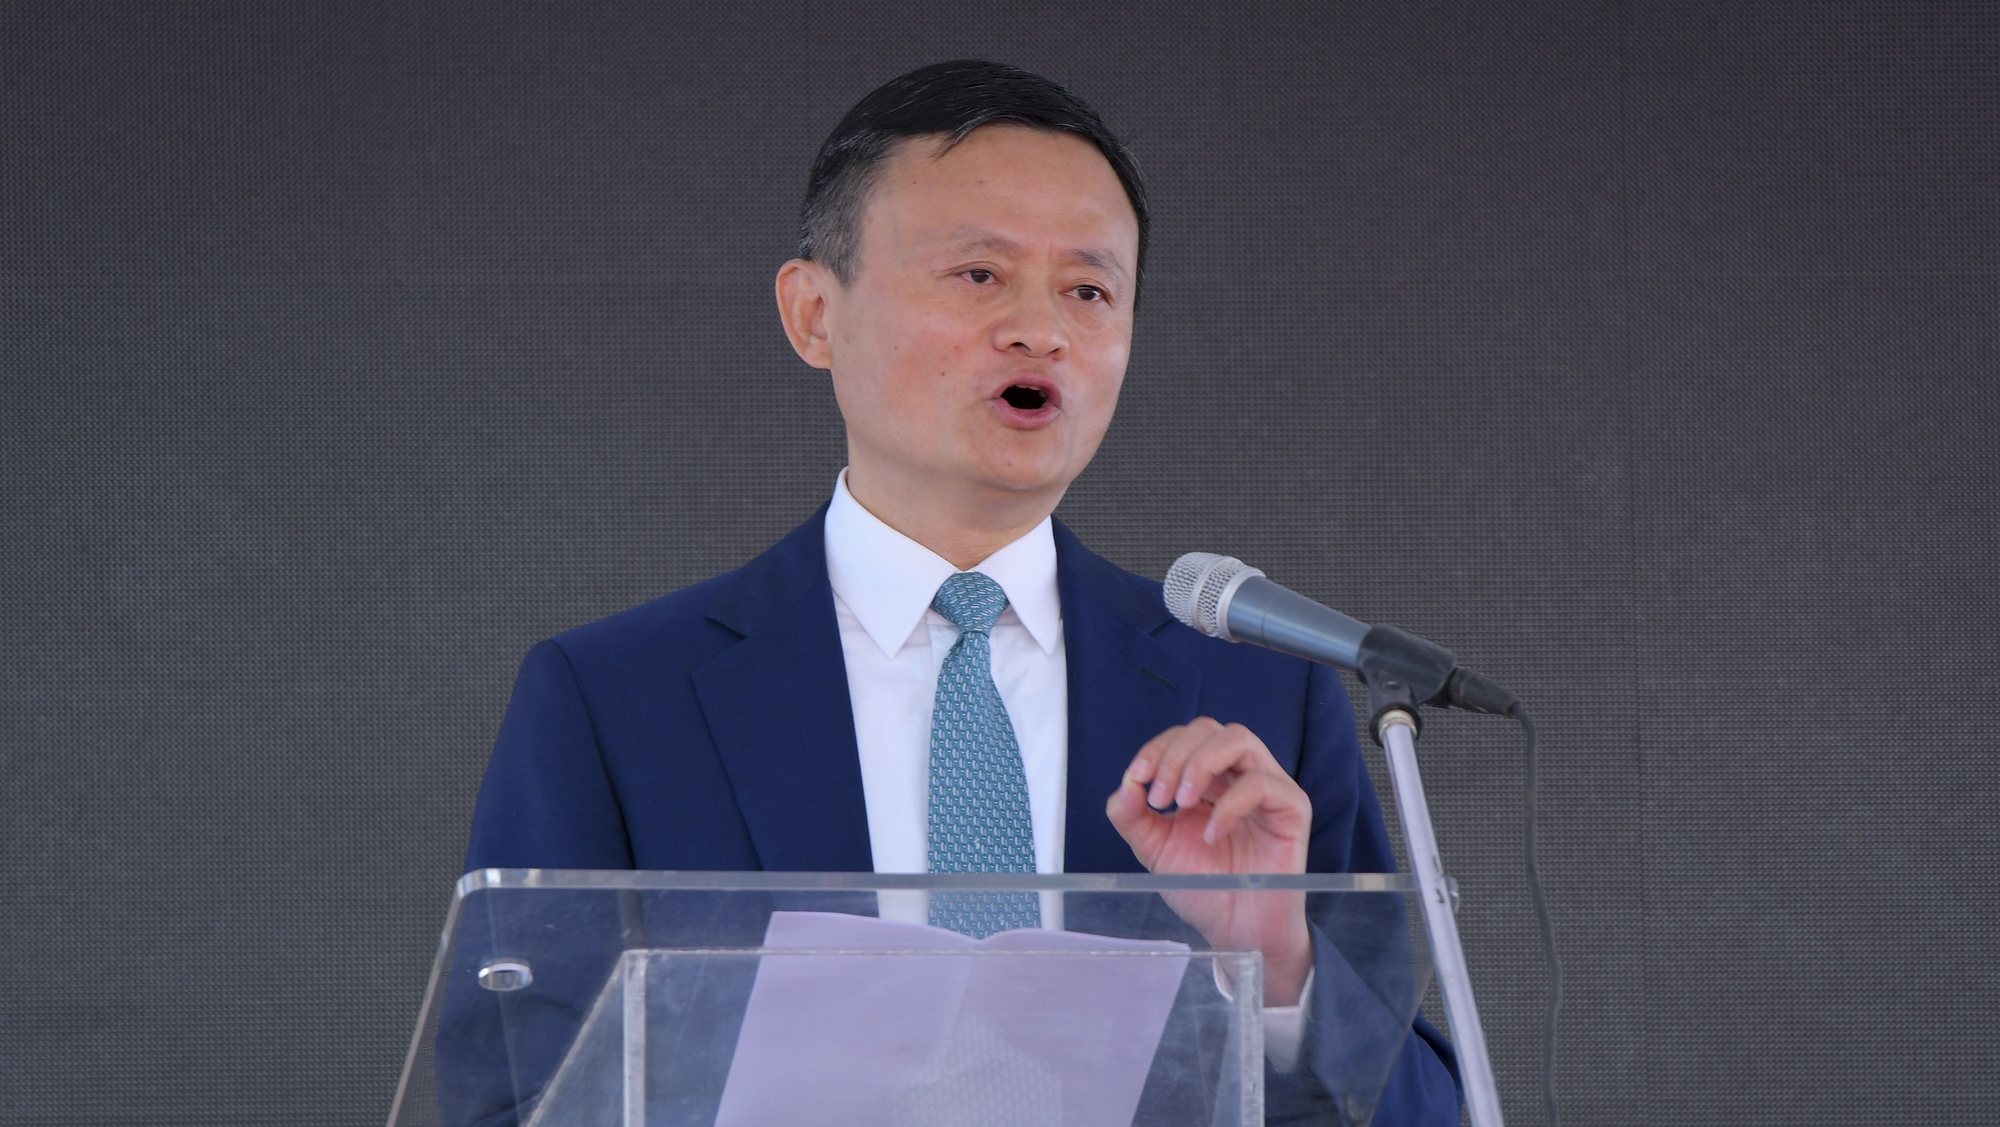 epa08024154 Jack Ma, the co-founder of China&#039;s Alibaba Group, delivers a speech during a singing ceremony in Addis Ababa, Ethiopia, 25 November 2019. According to a press release by Alibaba Group, Ethiopia and Alibaba signed three Memorandum of Understanding for the establishment of eWTP (electronic world trade platform) Hub in Ethiopia to assist Ethiopian businesses reach Chinese markets.  EPA/STR